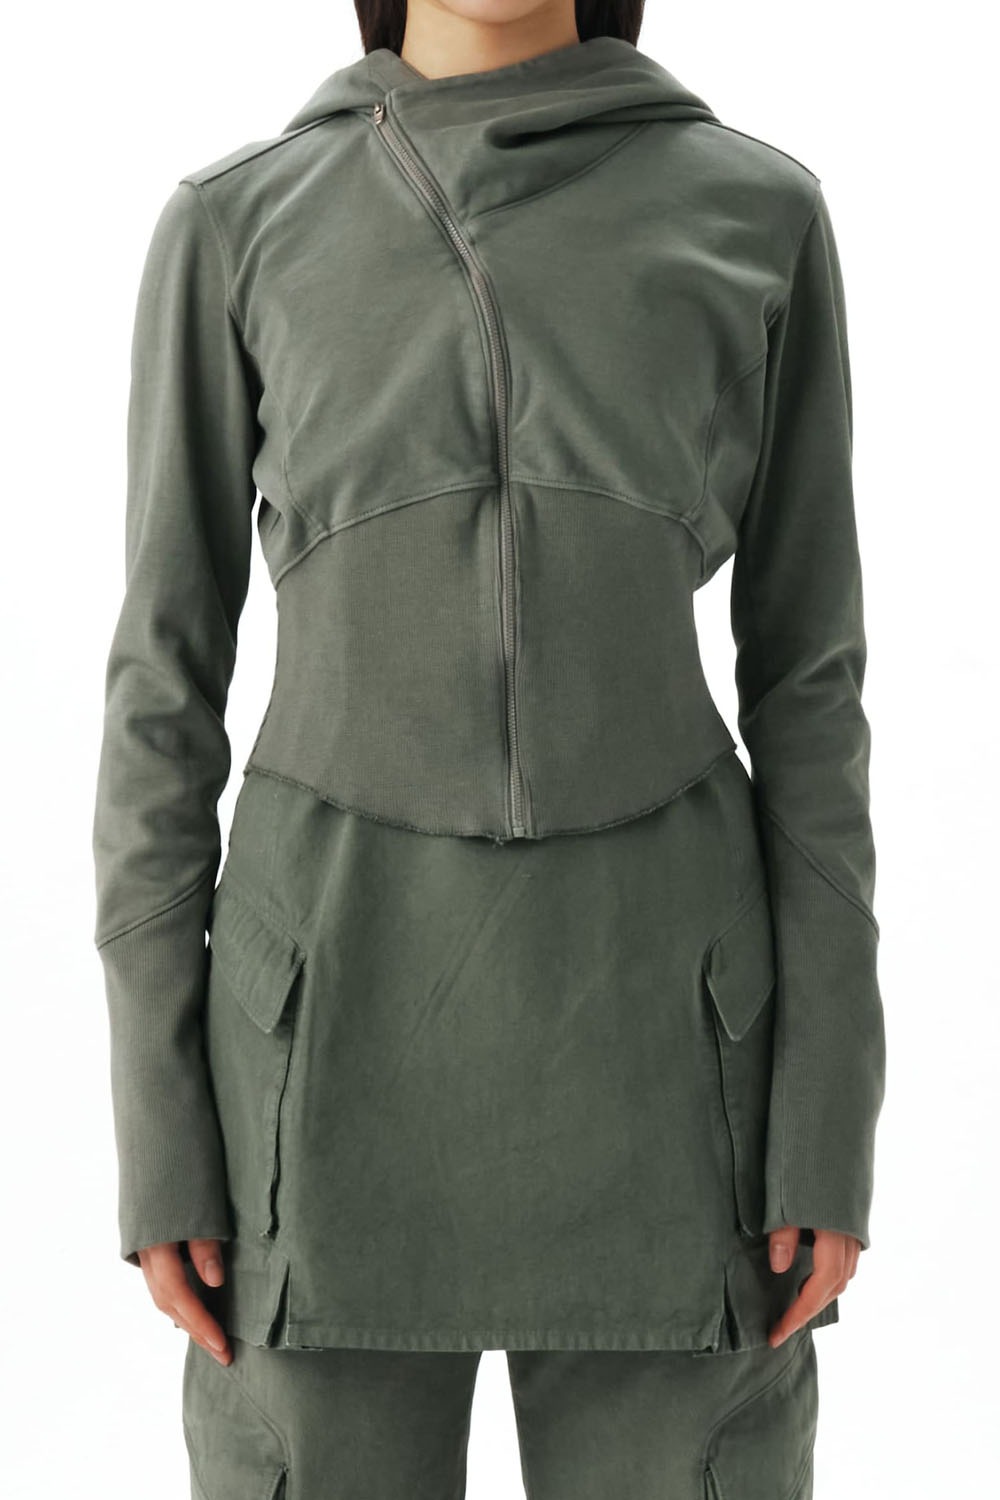 Womens Curved Hooded Sweat Zip Jacket-Olive